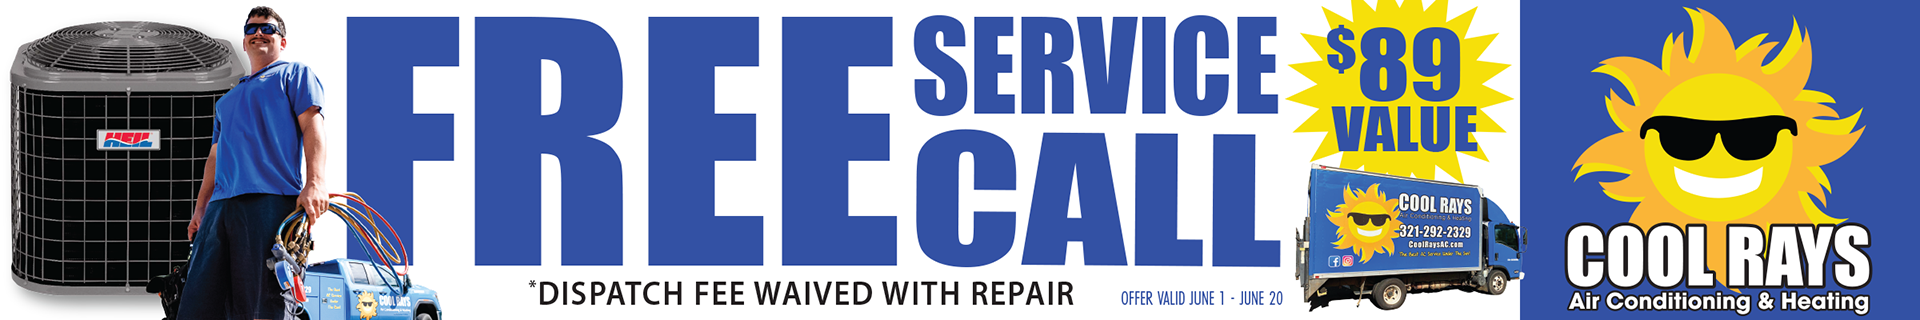 Free Service Call with Repair Purchase. Restrictions apply. Call for complete details.